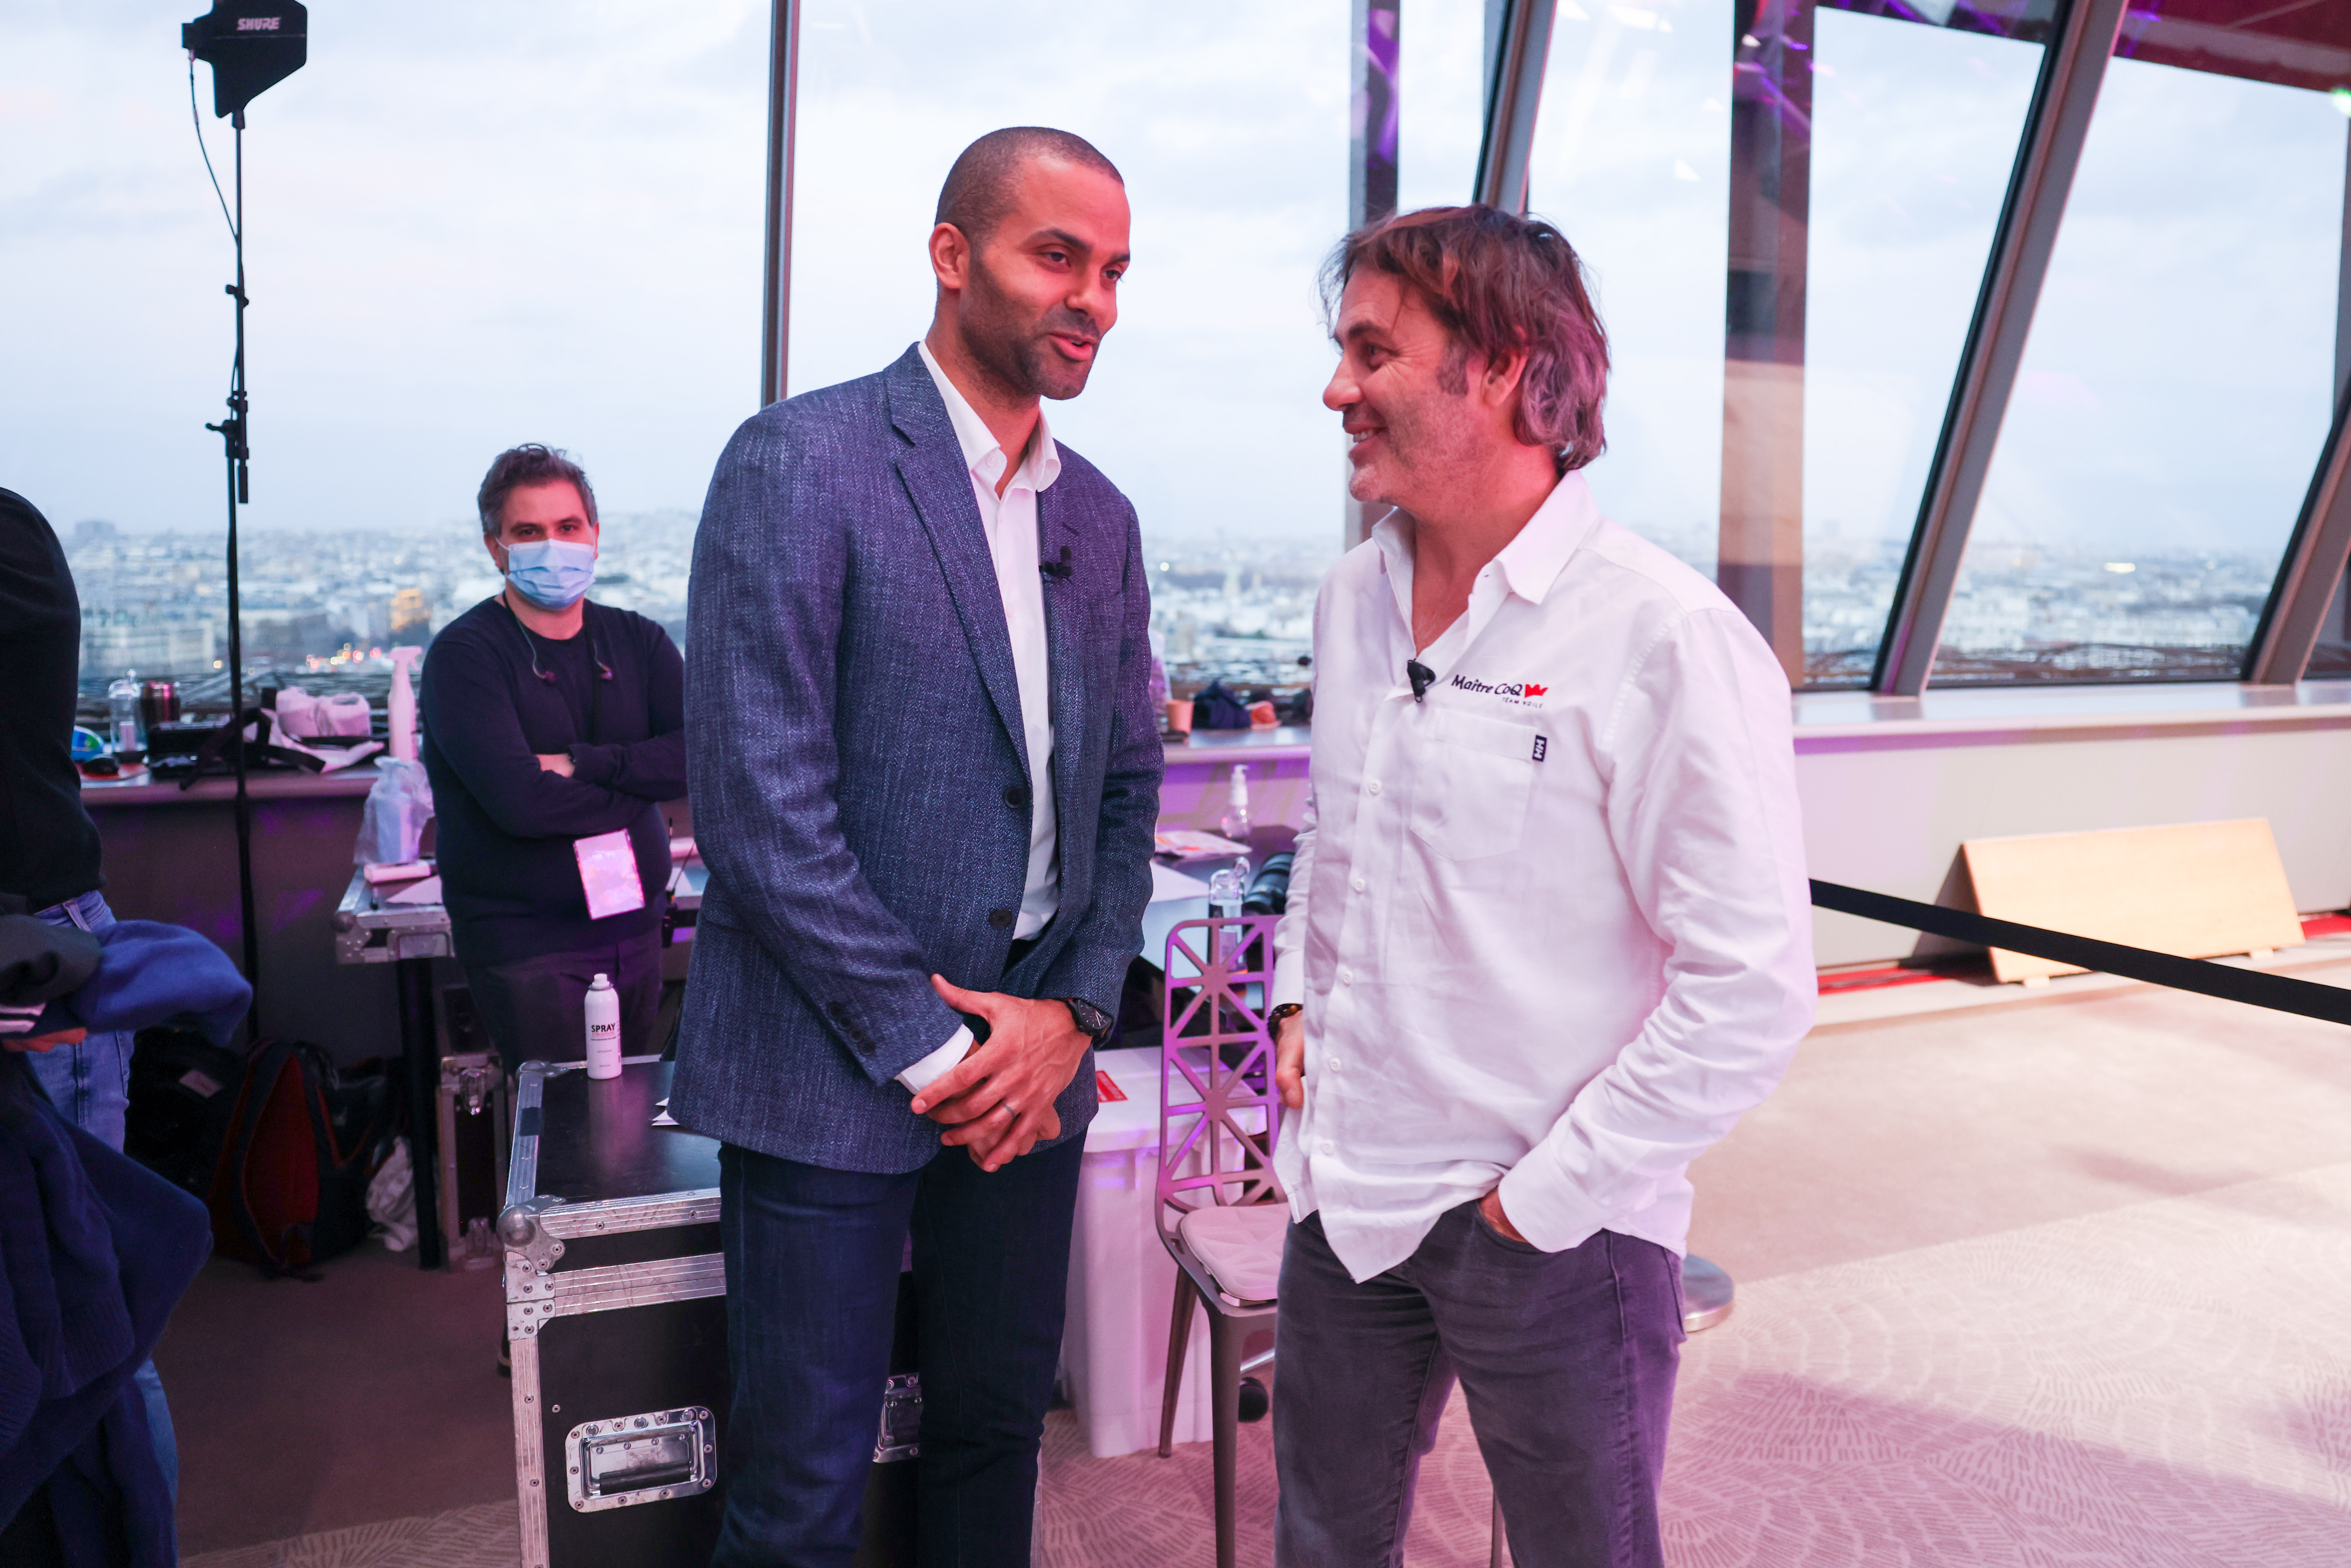 Former NBA player Tony Parker (L) attends the opening of Global Sports Week at the Eiffel Tower in 2021